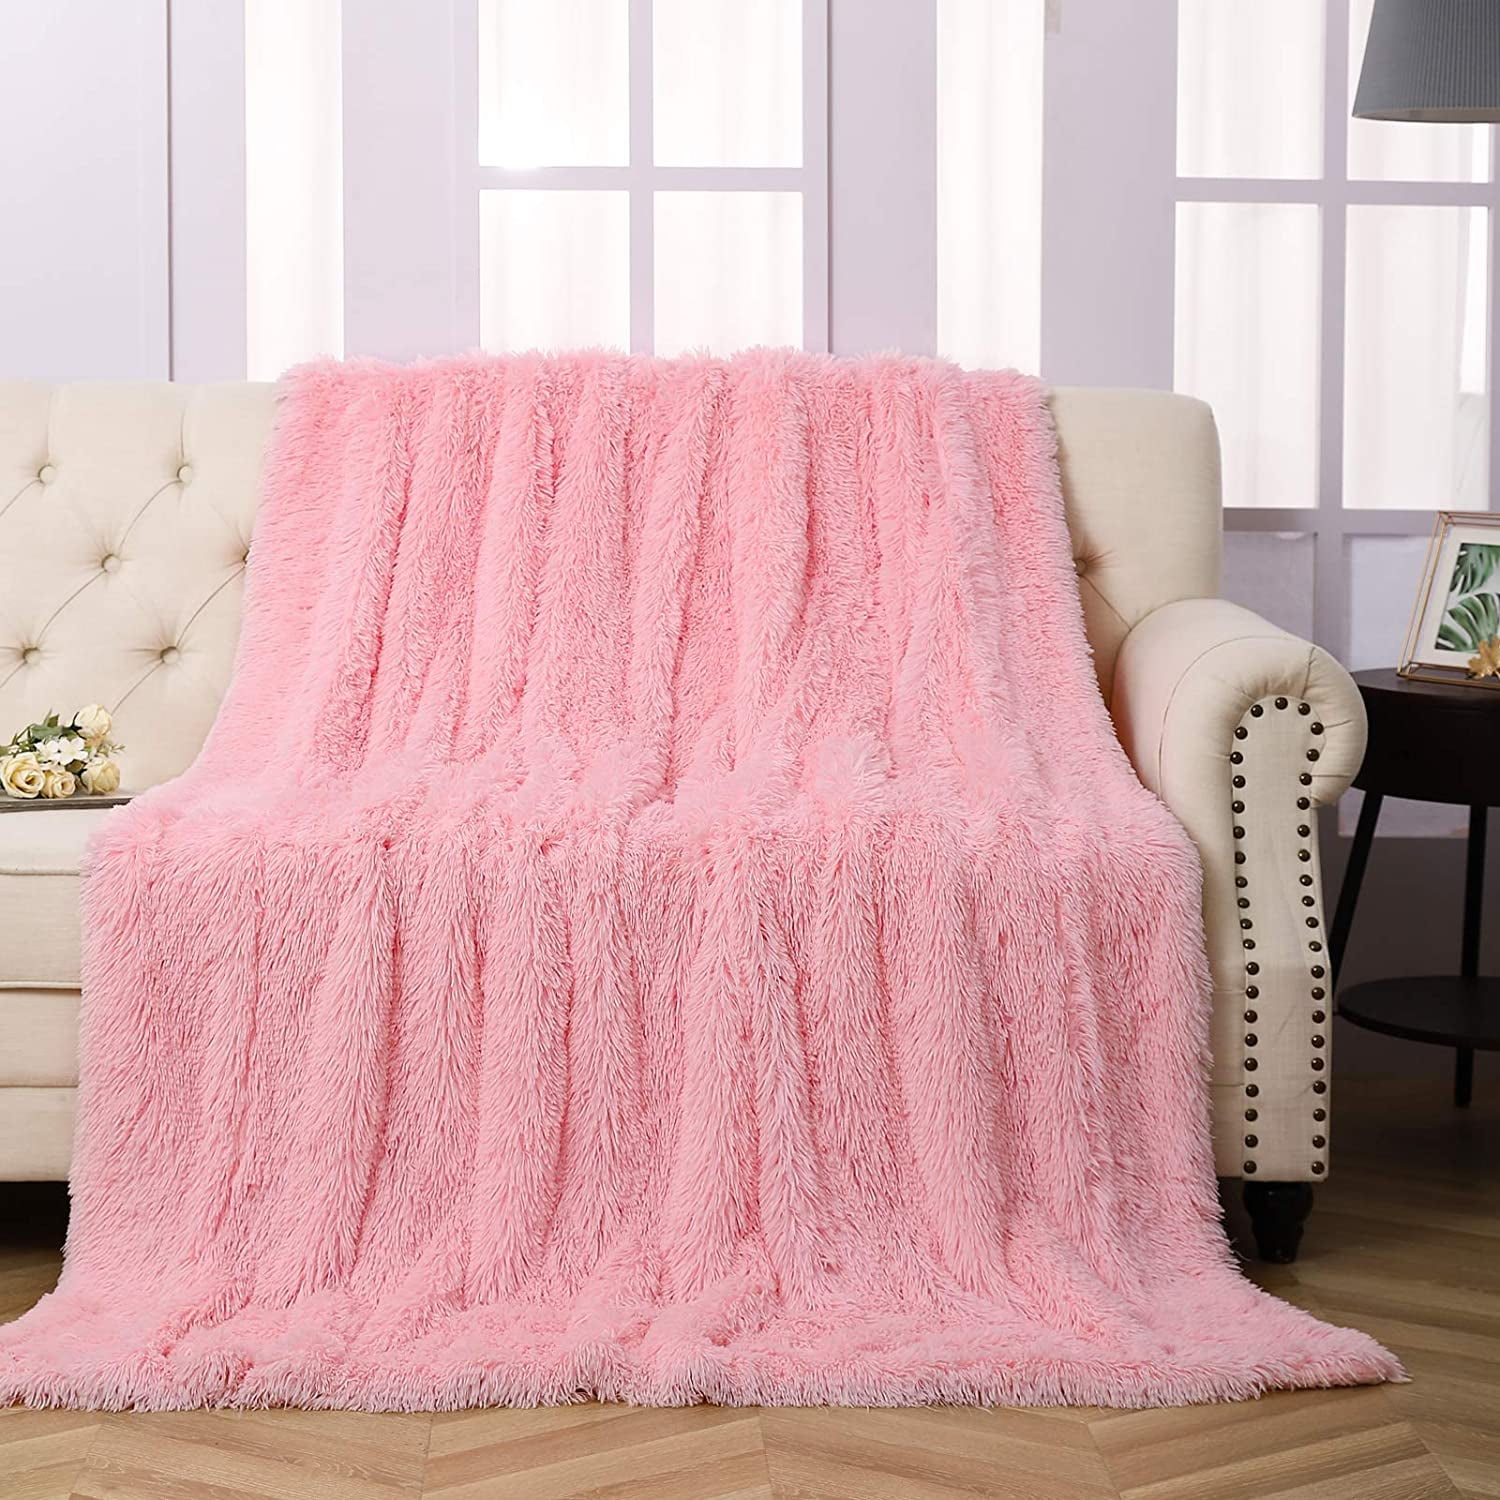  Plush Fluffy Fuzzy Cozy Super Soft Throw Blanket Oversized 5' x  6' for Sofa Couch Chair Bed and Travel in The car (Cats Meadow) (throw8626)  : Home & Kitchen